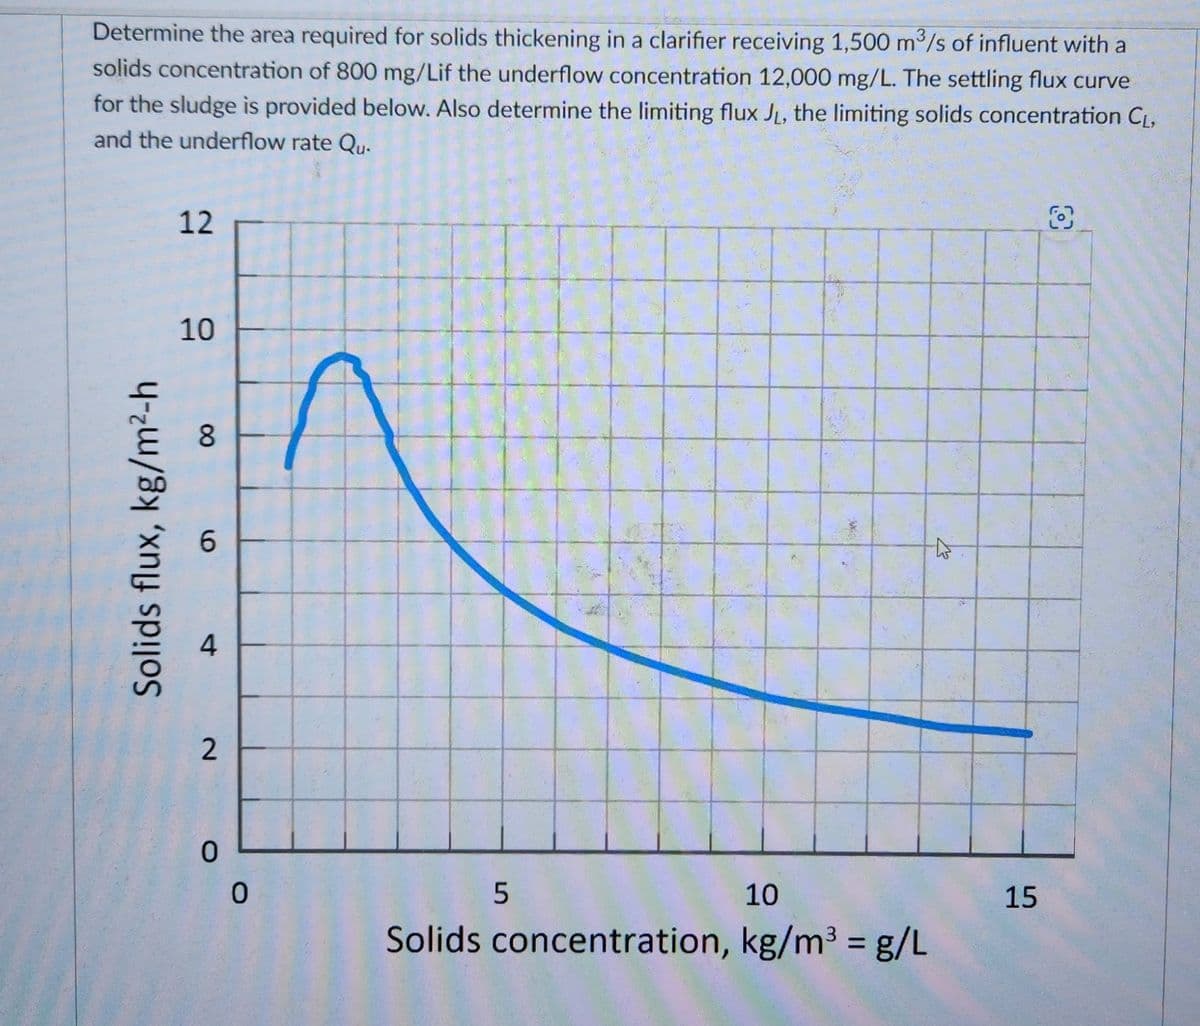 Determine the area required for solids thickening in a clarifier receiving 1,500 m³/s of influent with a
solids concentration of 800 mg/Lif the underflow concentration 12,000 mg/L. The settling flux curve
for the sludge is provided below. Also determine the limiting flux JL, the limiting solids concentration CL,
and the underflow rate Qu.
Solids flux, kg/m²-h
12
10
8
6
4
2
0
0
5
BAT
10
Solids concentration, kg/m³ = g/L
15